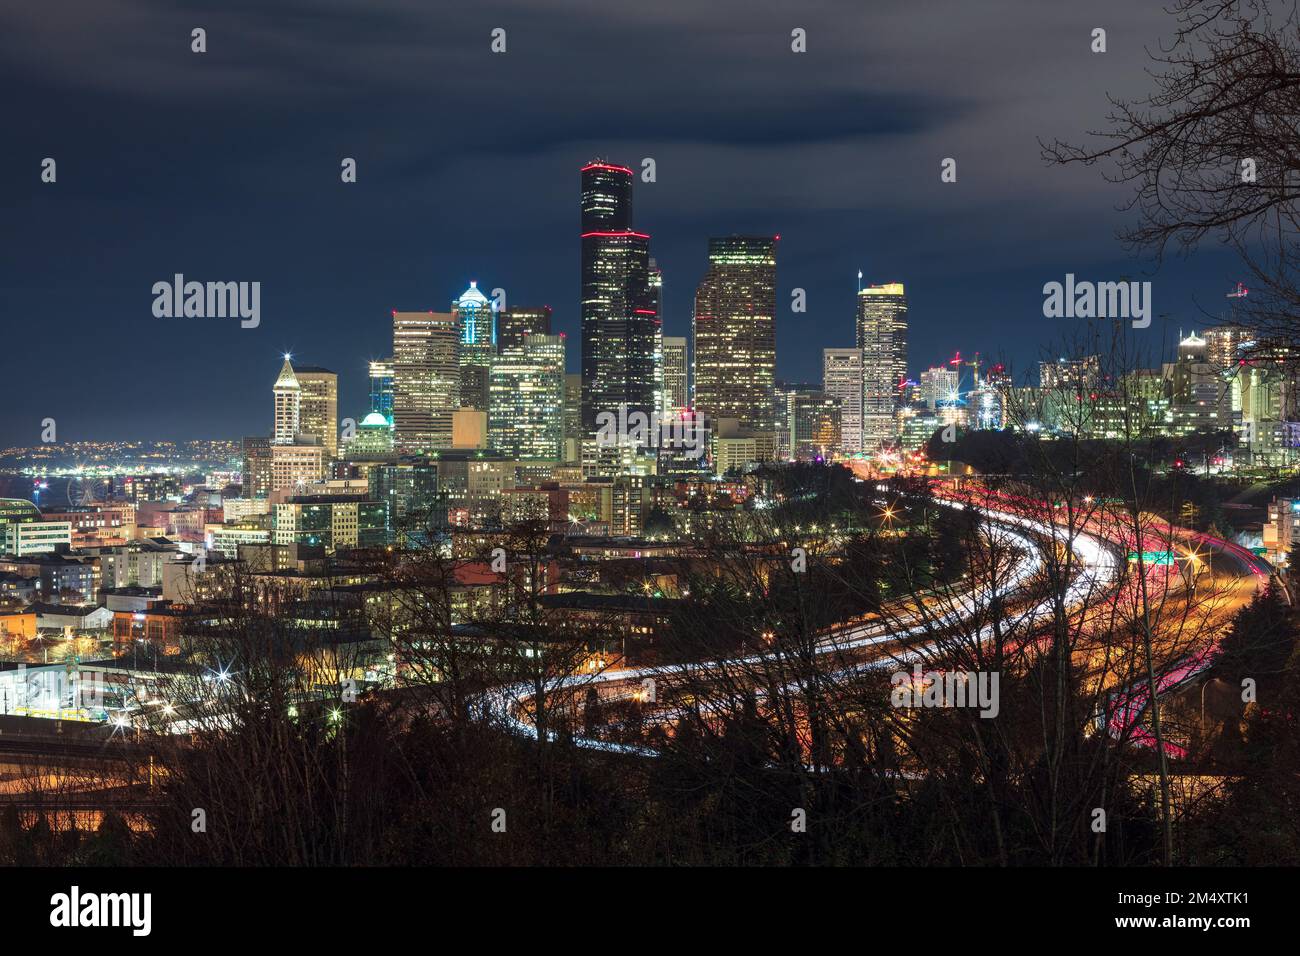 Downtown Seattle skyline at night Stock Photo